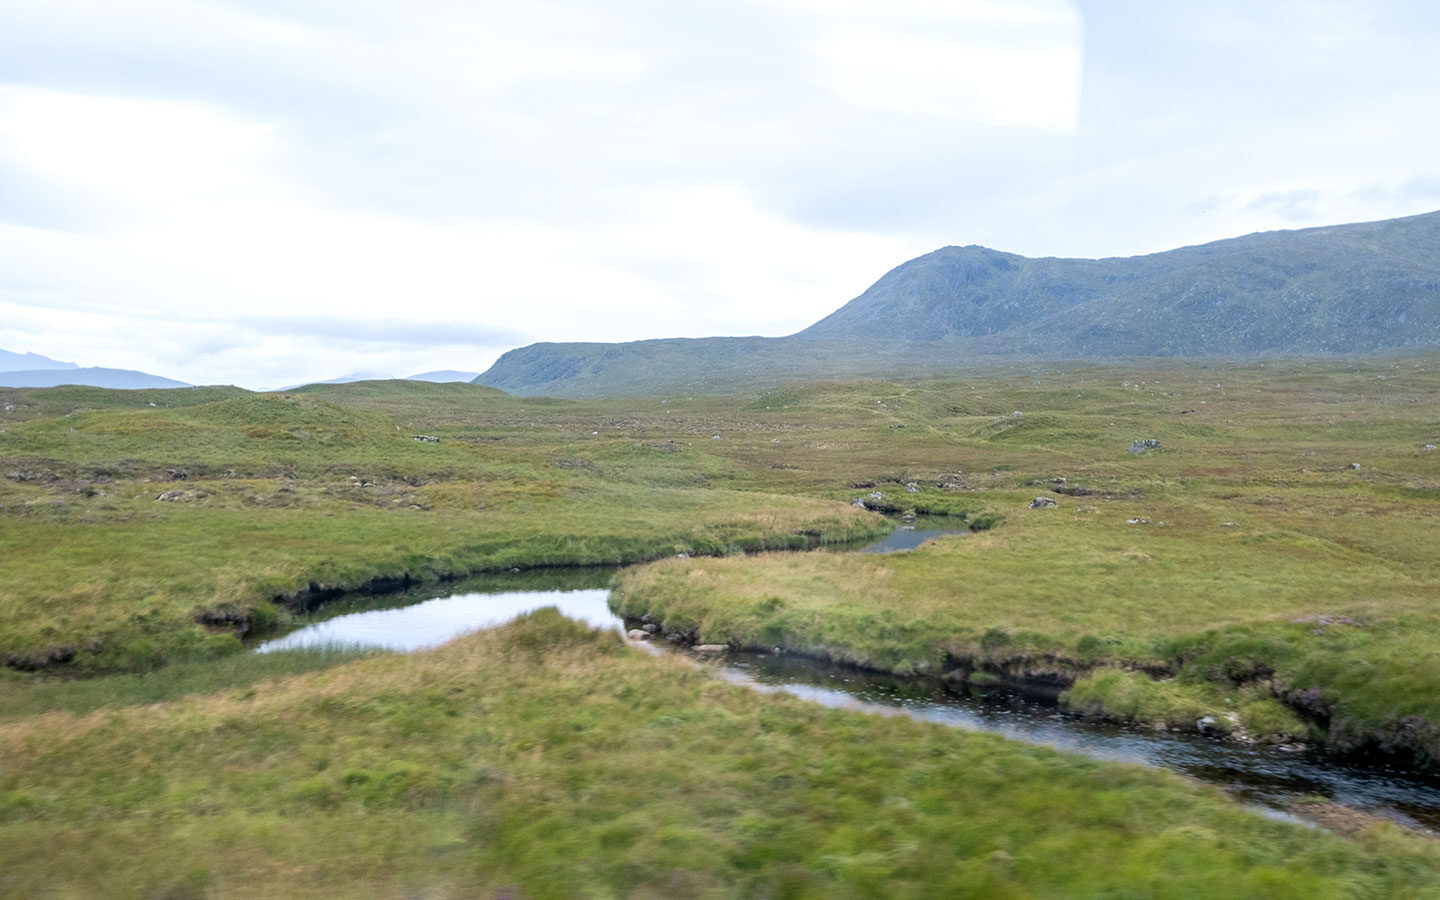 Views of the Scottish Highlands from the train window